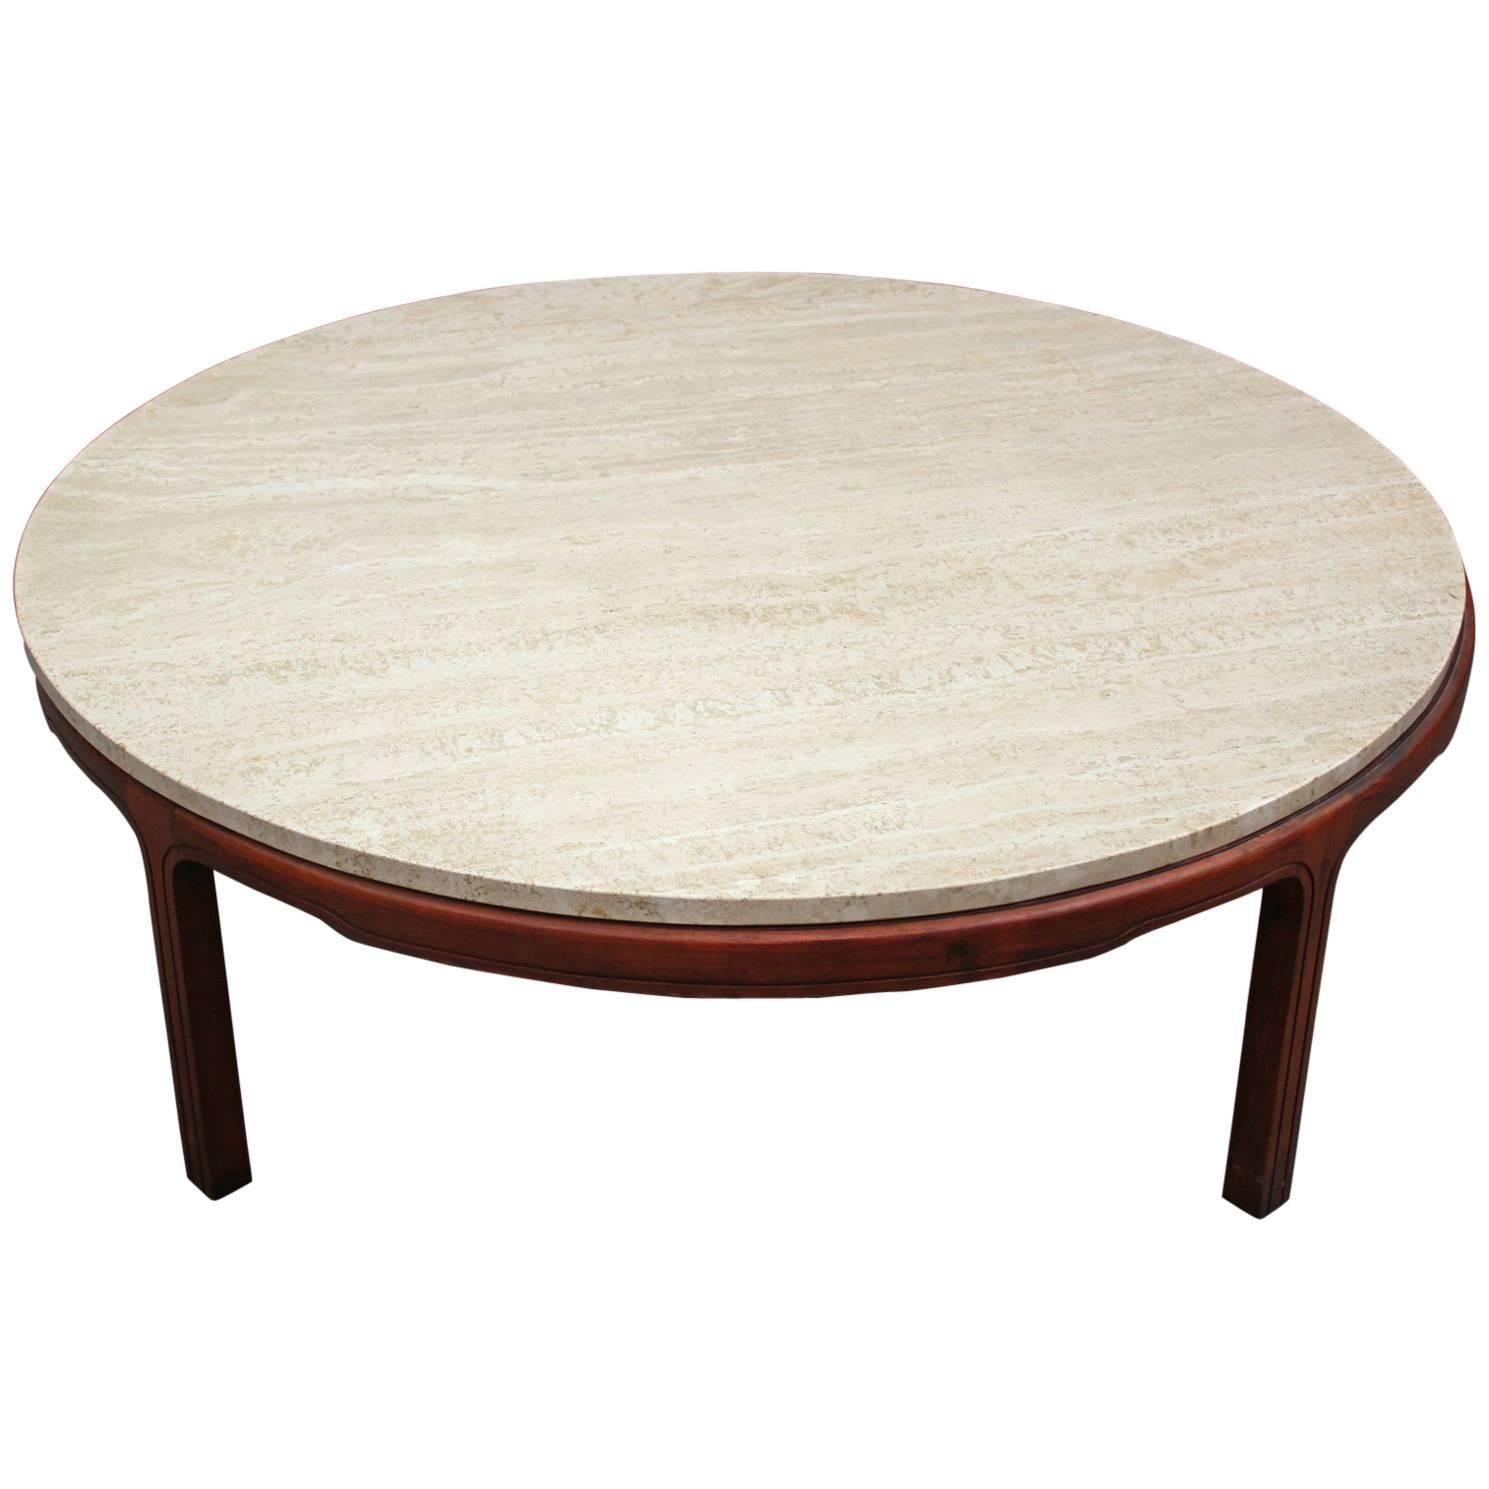 Round Travertine Topped Coffee Table